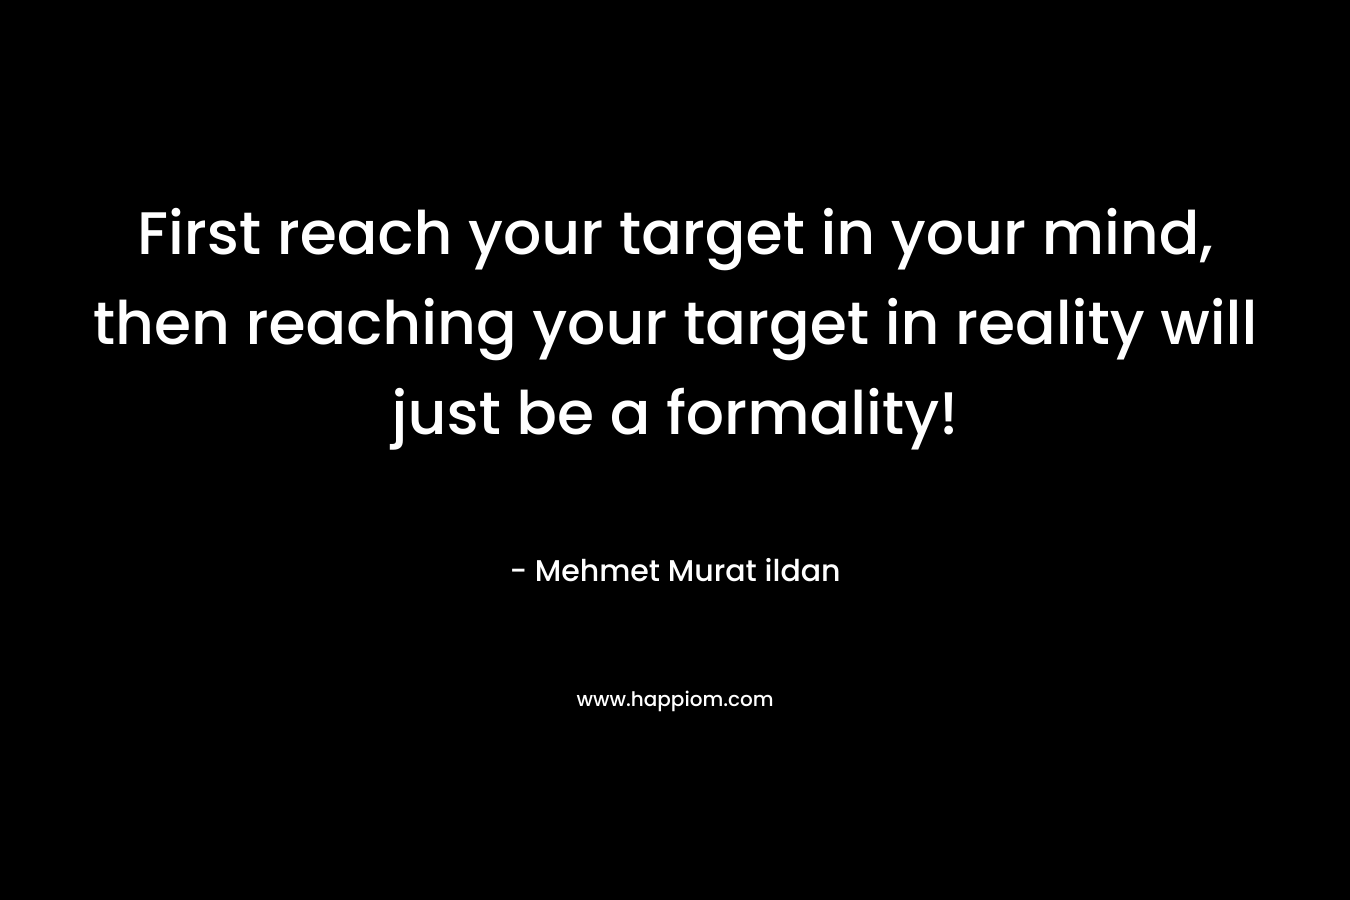 First reach your target in your mind, then reaching your target in reality will just be a formality!